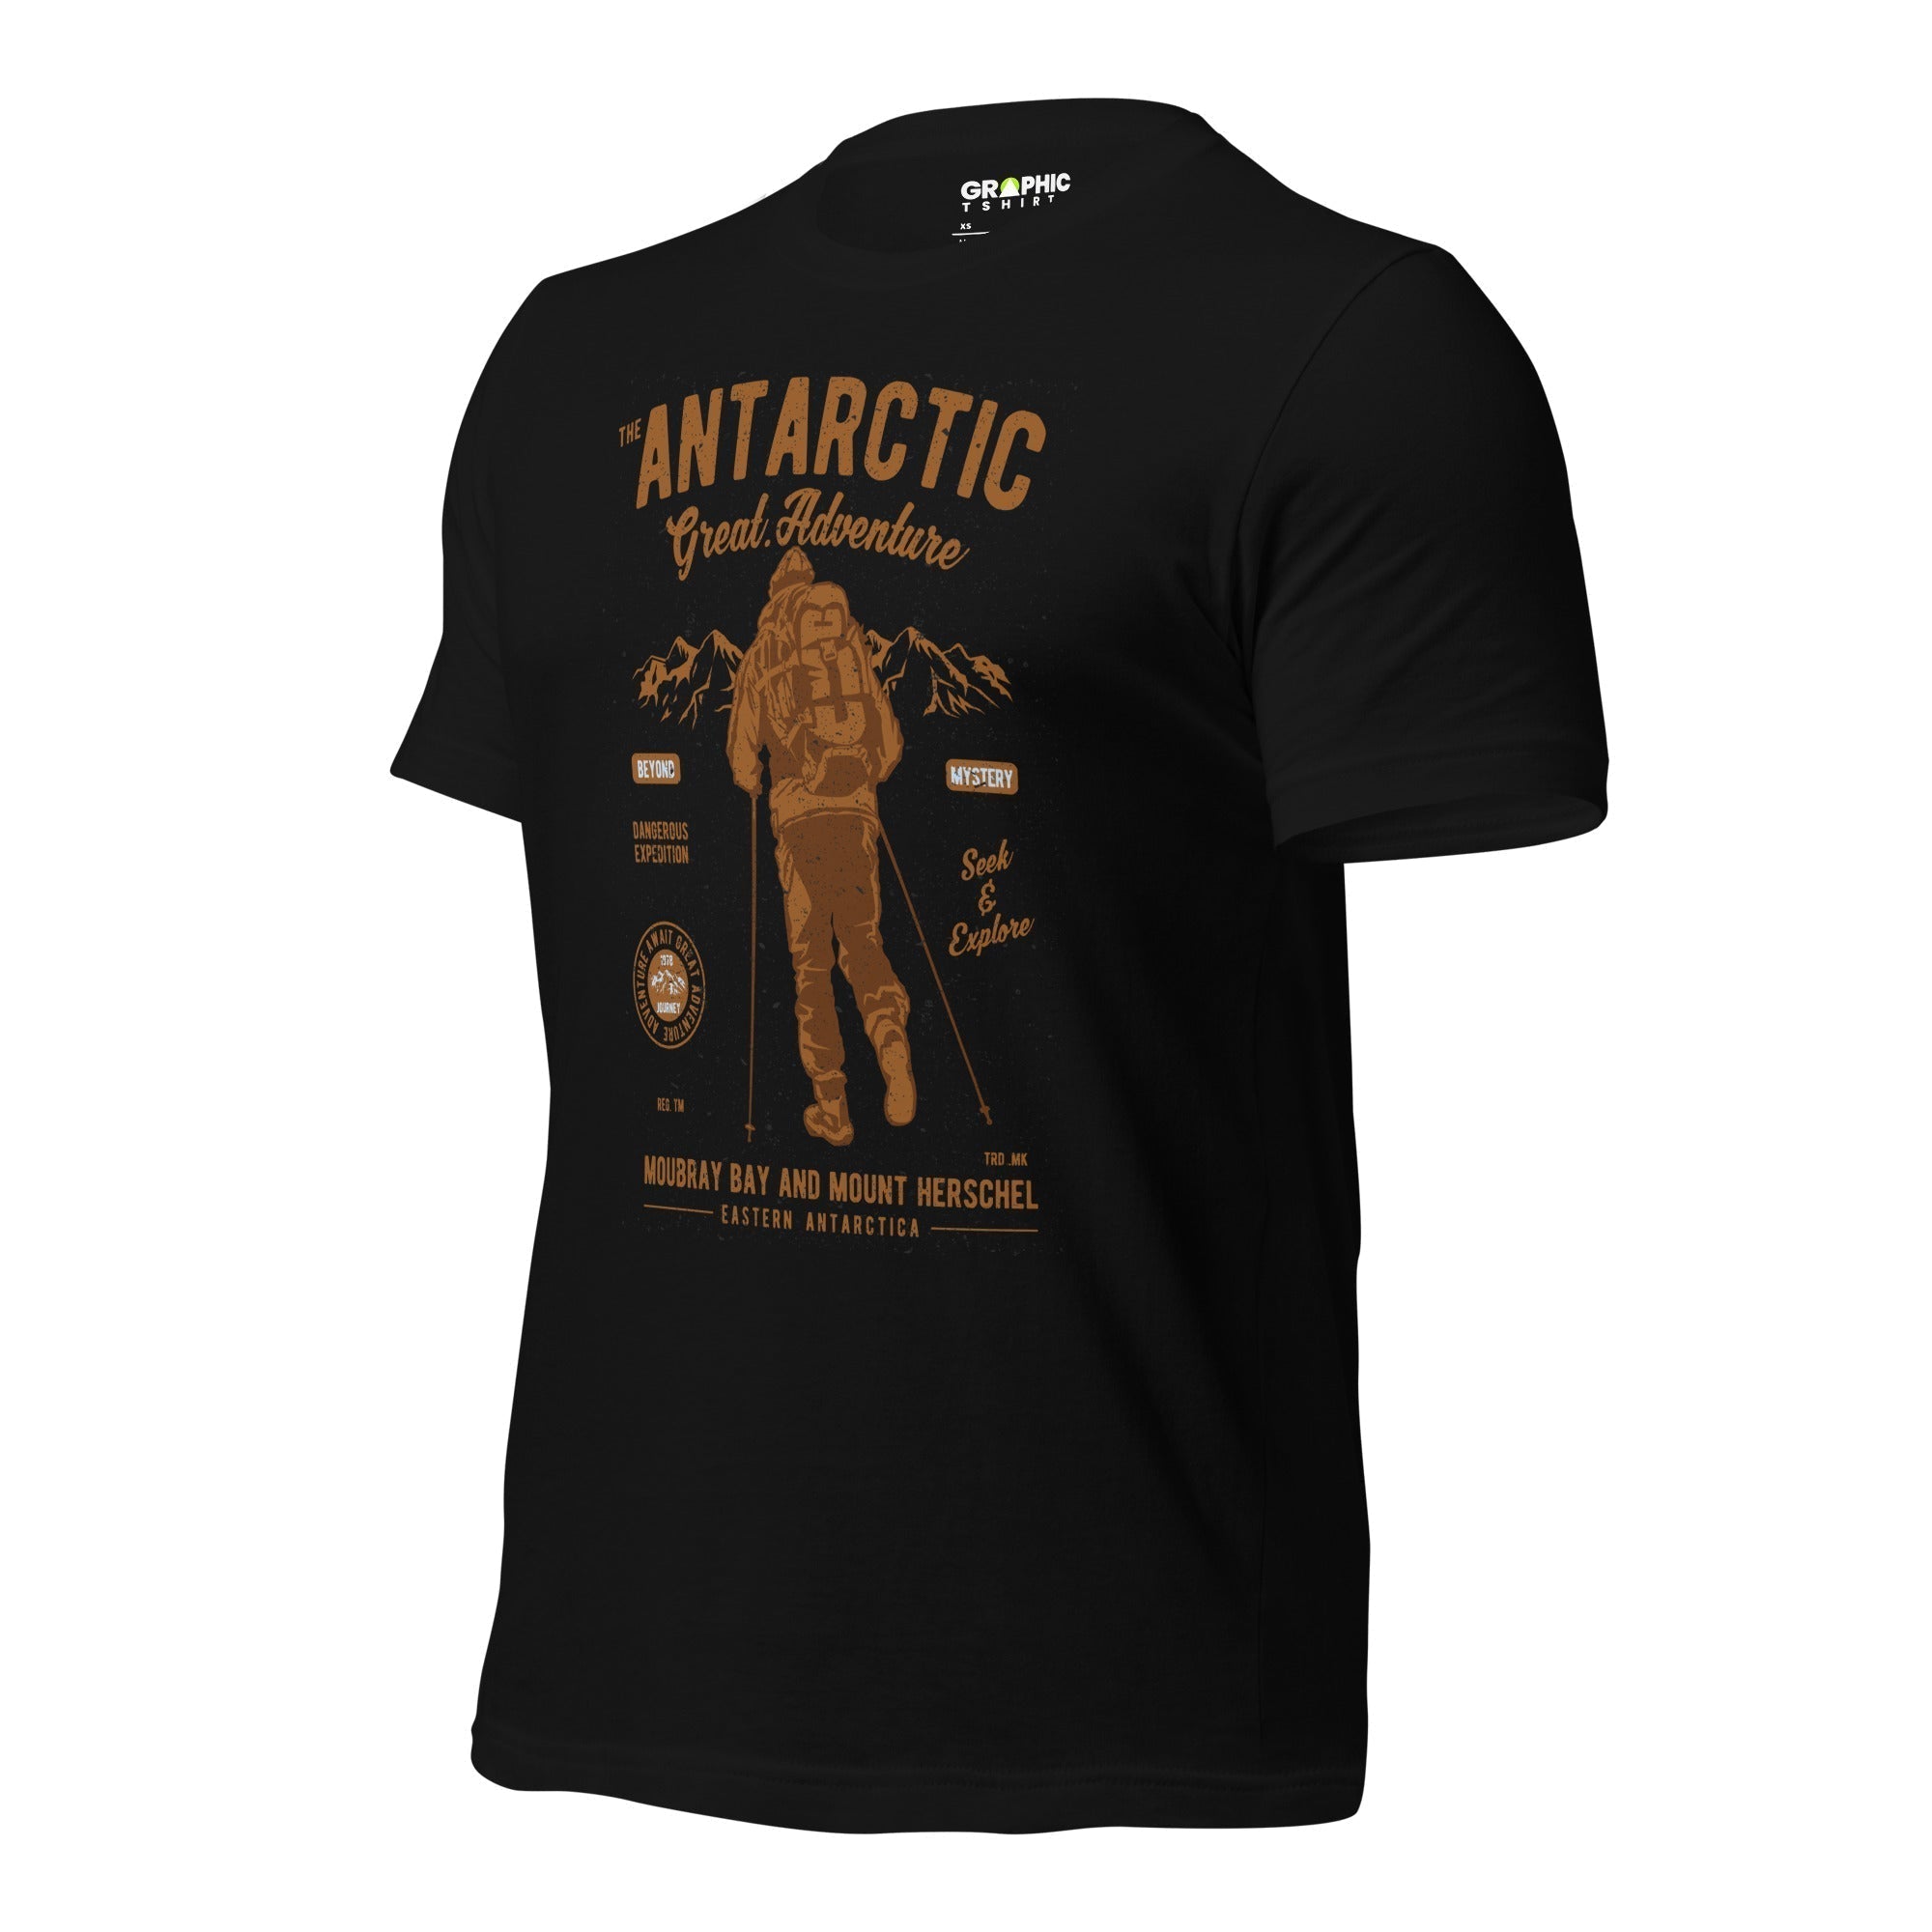 Unisex Staple T-Shirt - The Antarctic Great Adventure Beyond Mystery Moubray Bay And Mount Herschel Eastern Antarctica - GRAPHIC T-SHIRTS